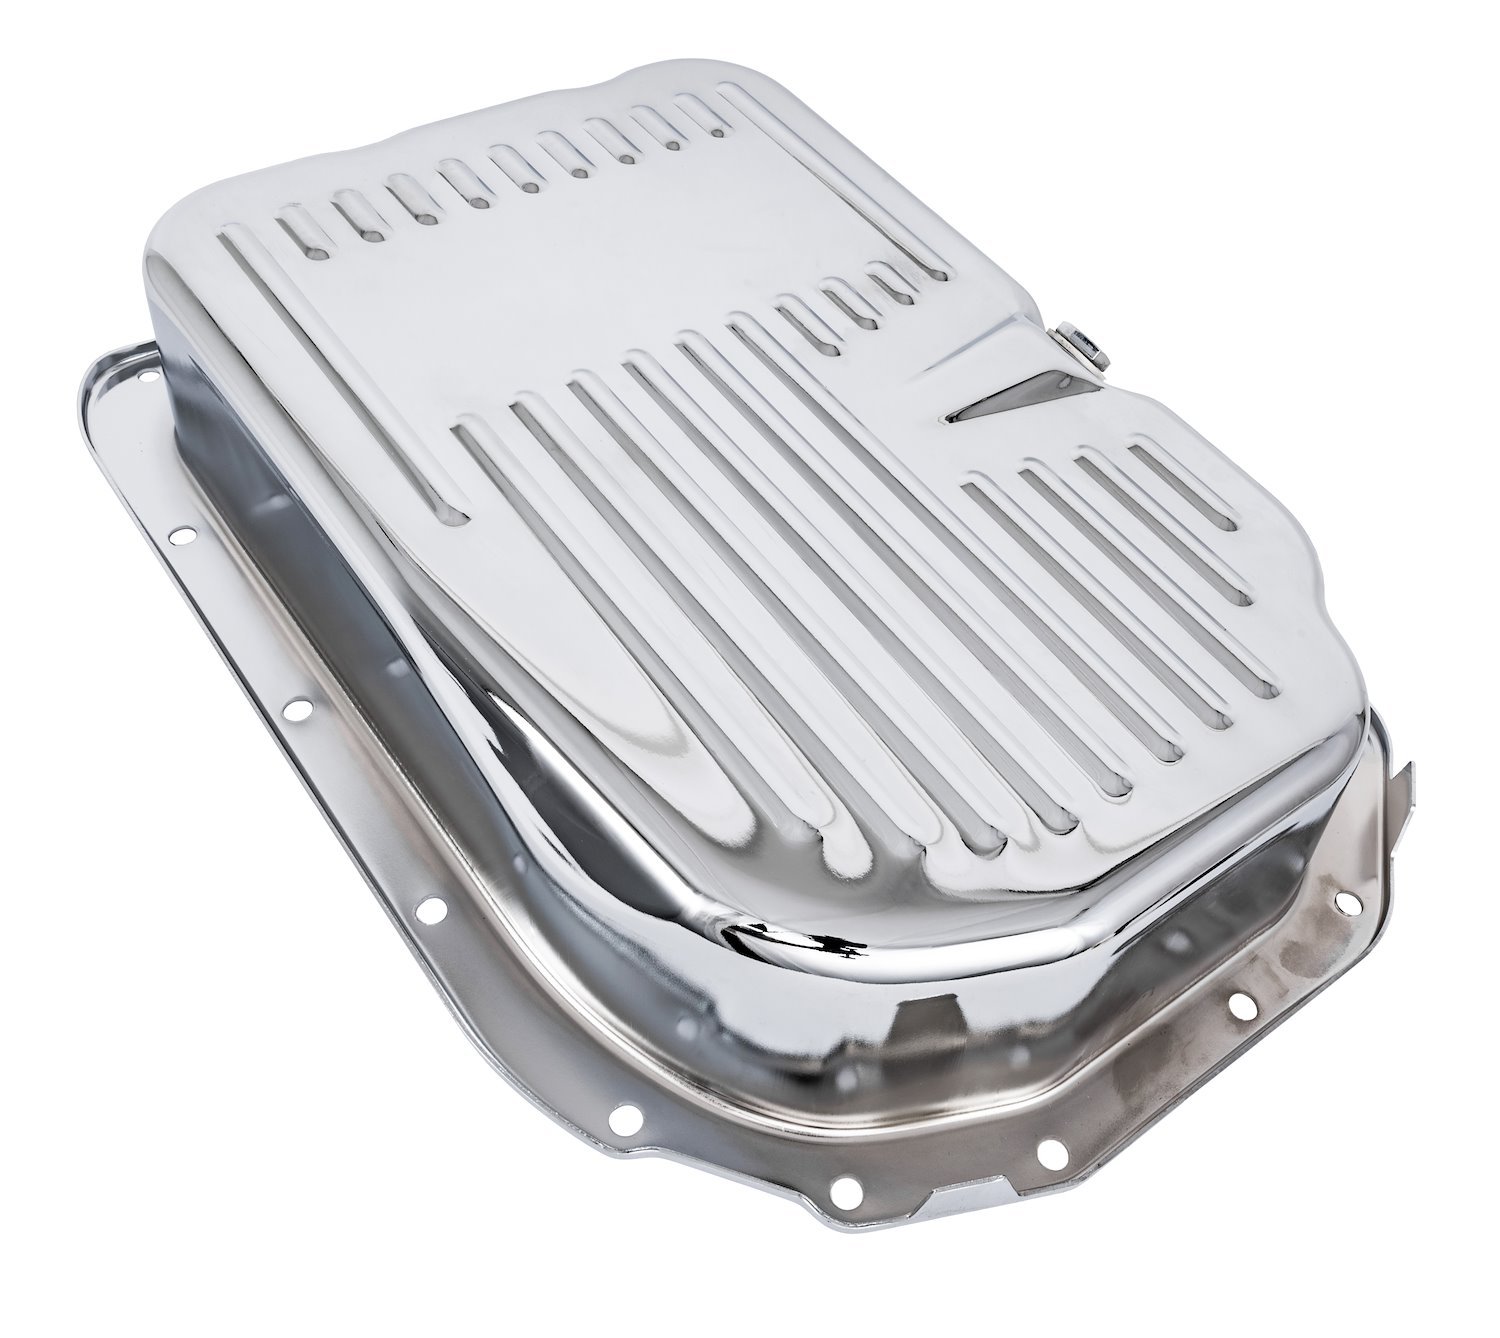 Automatic Transmission Pan for GM GM 4L80, 4L80E, 4L85E, 4 in. Deep w/Extra Capacity [Chrome Plated Steel]